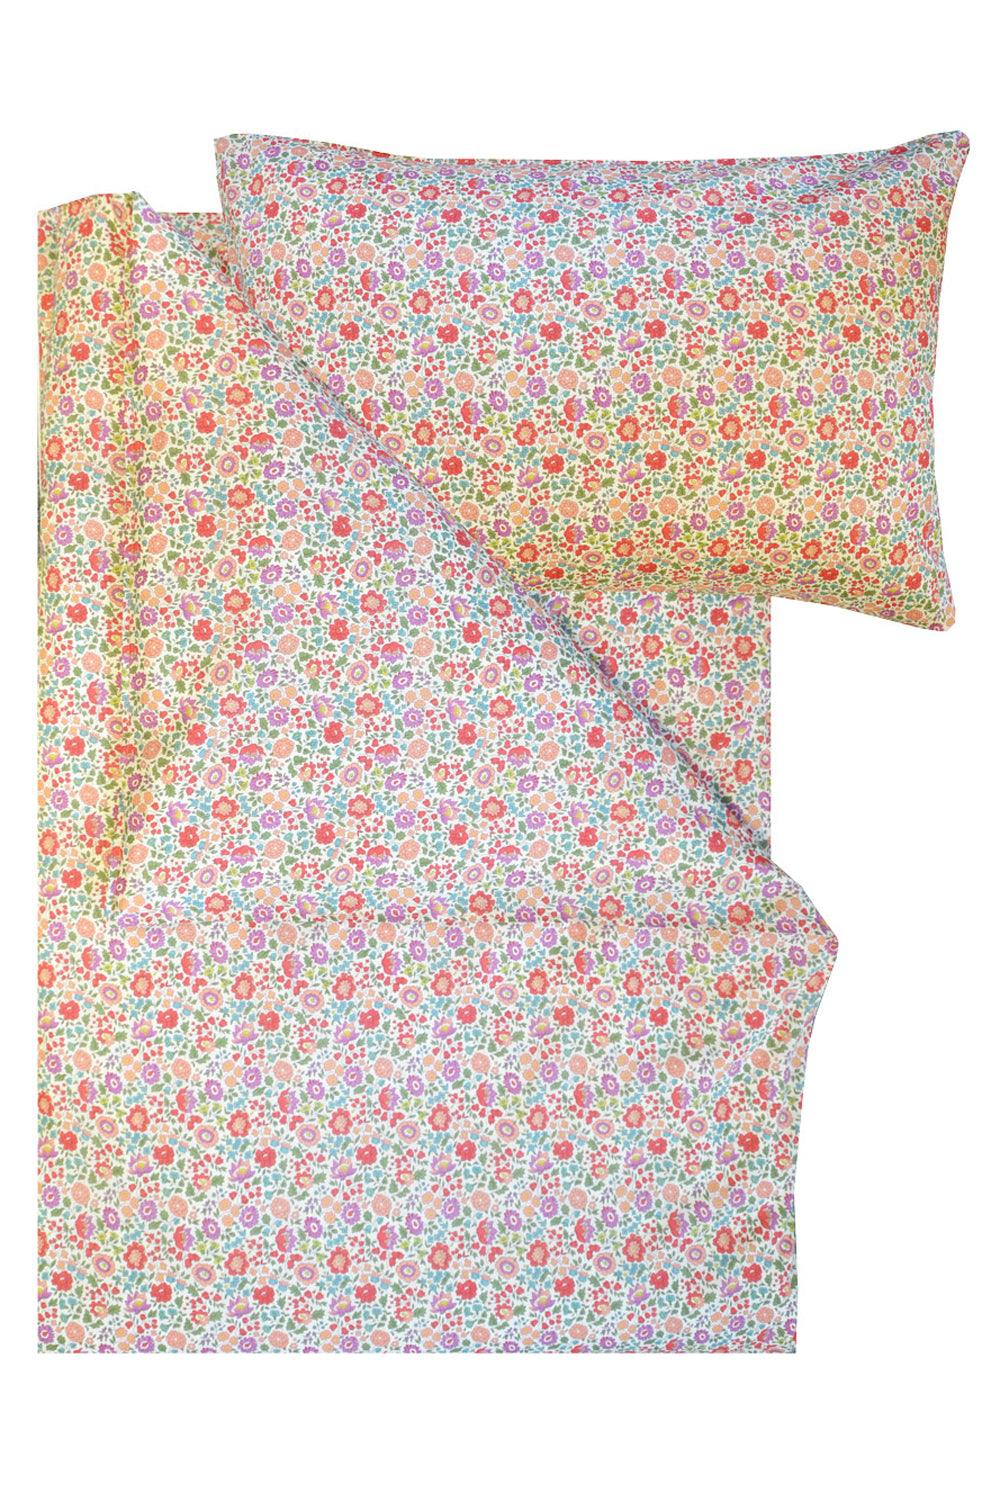 Bedding made with Liberty Fabric D'ANJO PEACH - Coco & Wolf